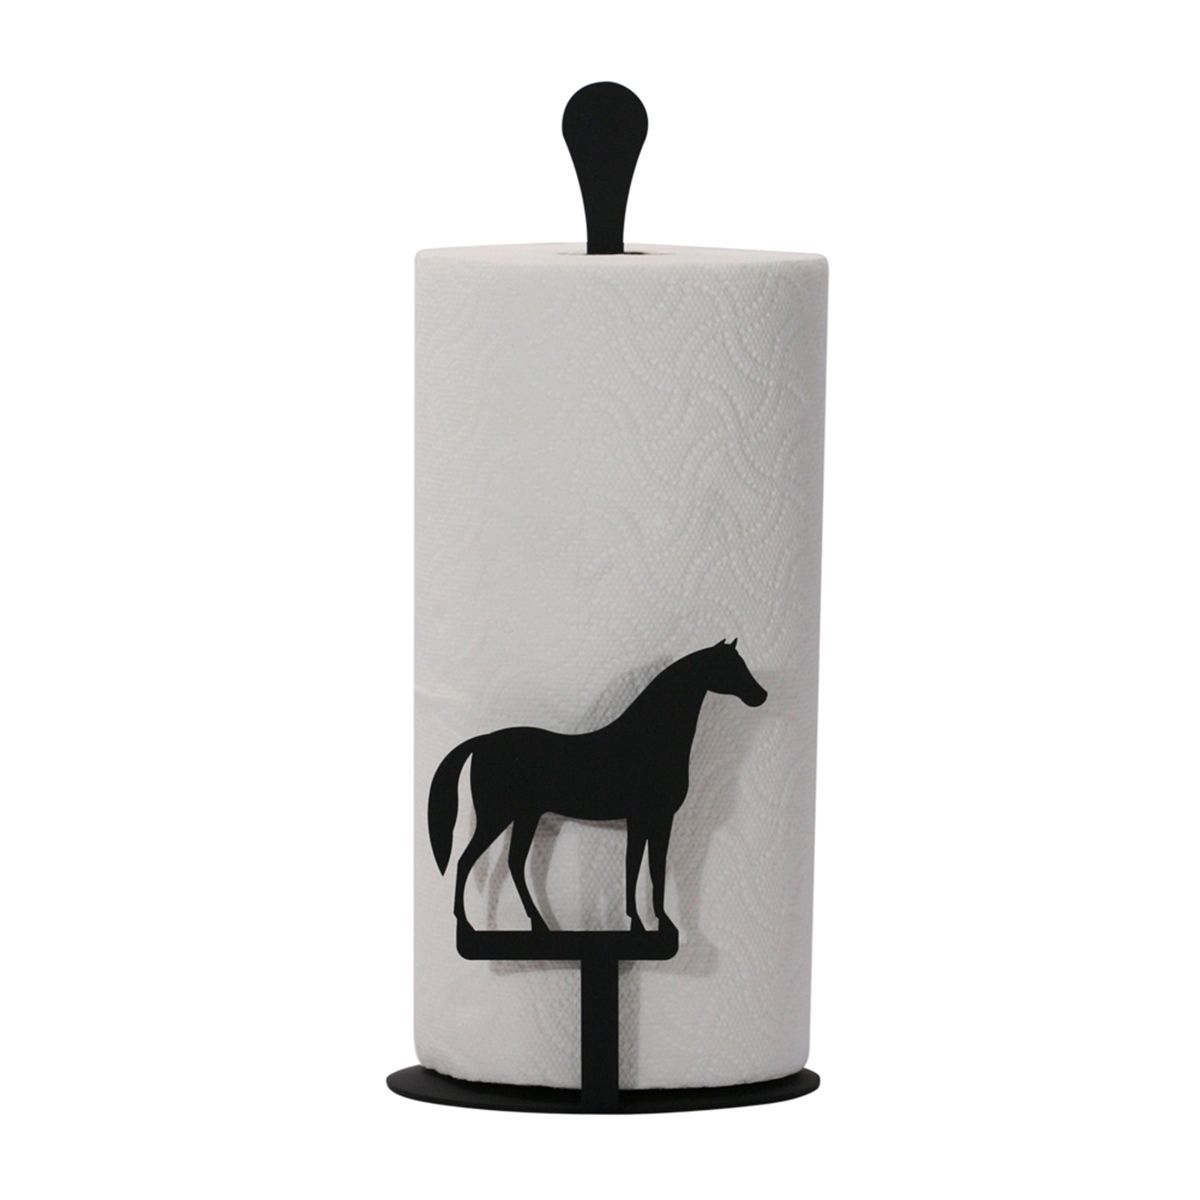 Village Wrought Iron Horse - Paper Towel Stand